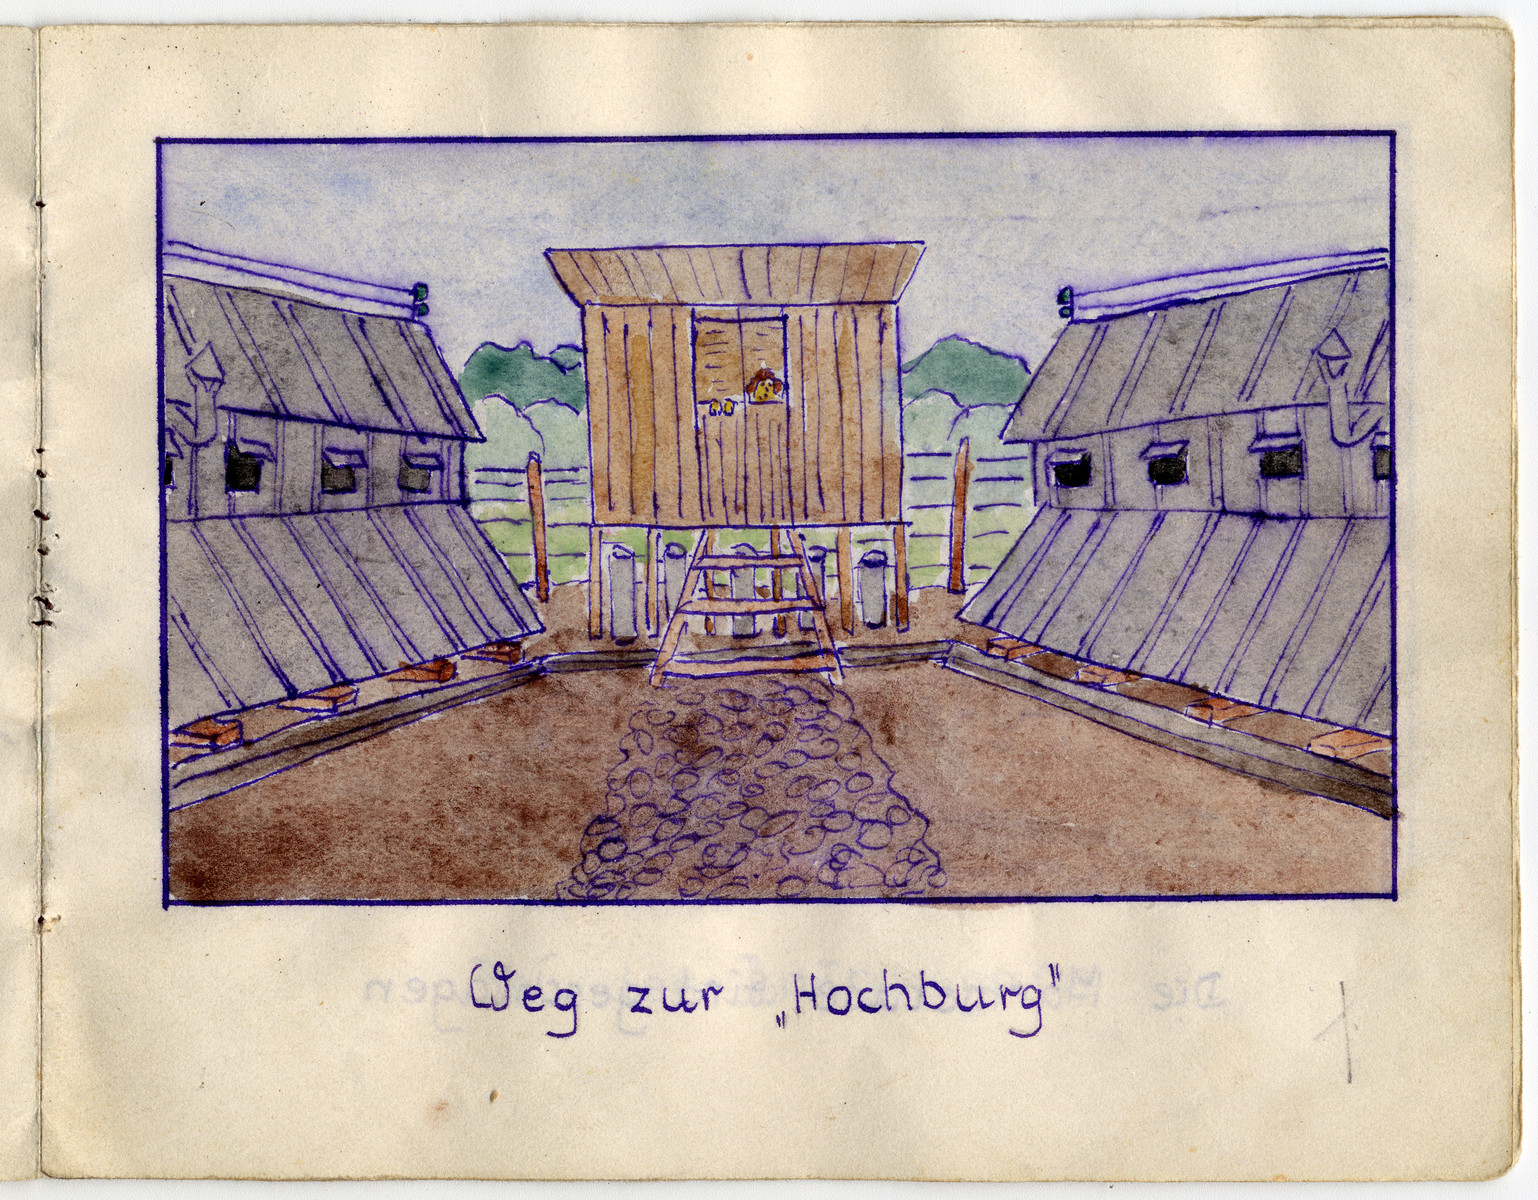 Page from the memoirs of Camp de Gurs illustrated by Eva Liebhold.

This page is entitled  "The way to Hochburg."